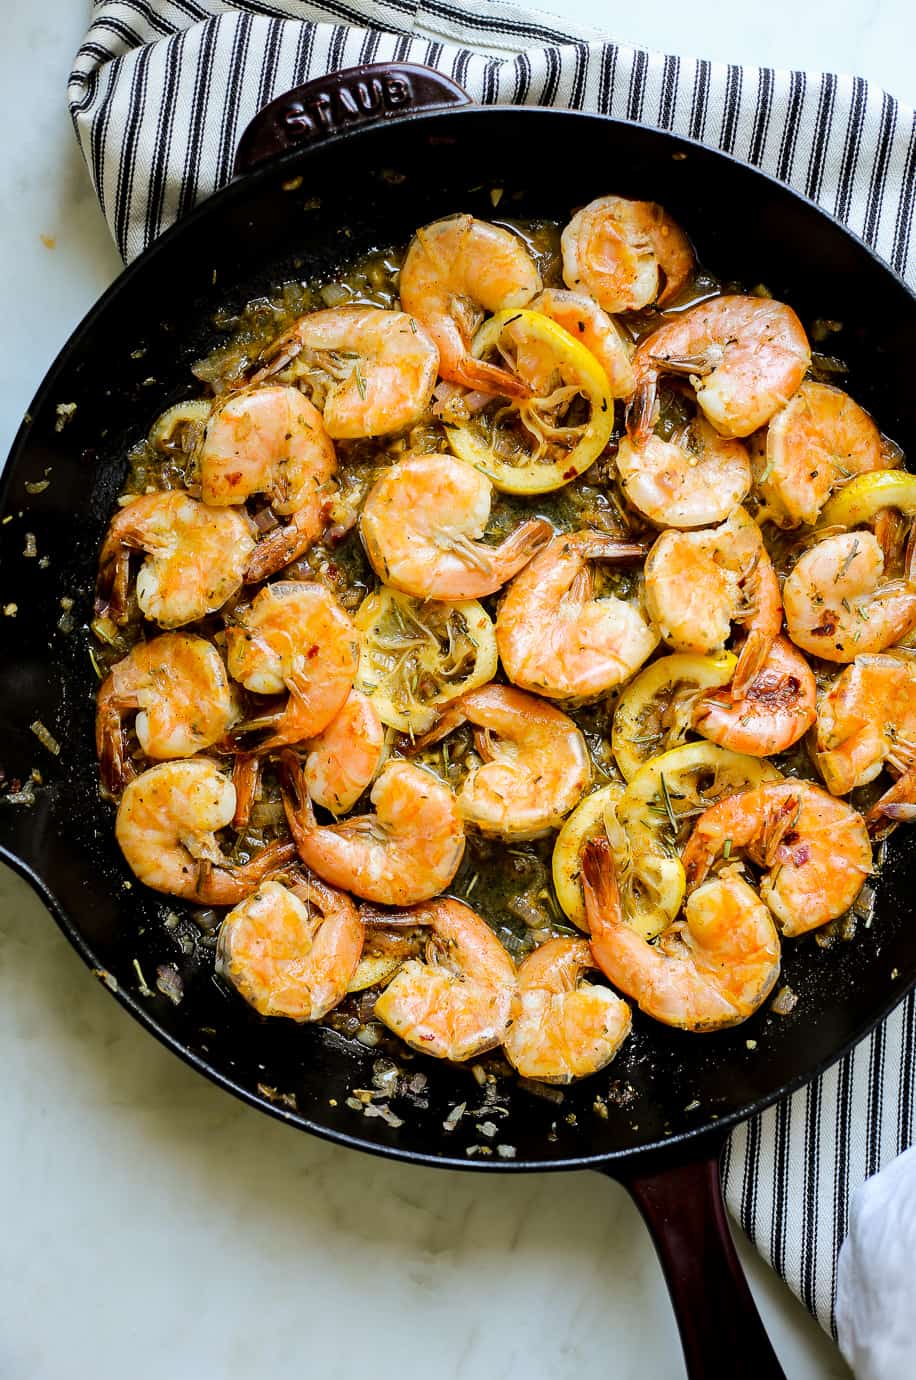 New Orleans-Style Barbecued Shrimp - The Defined Dish